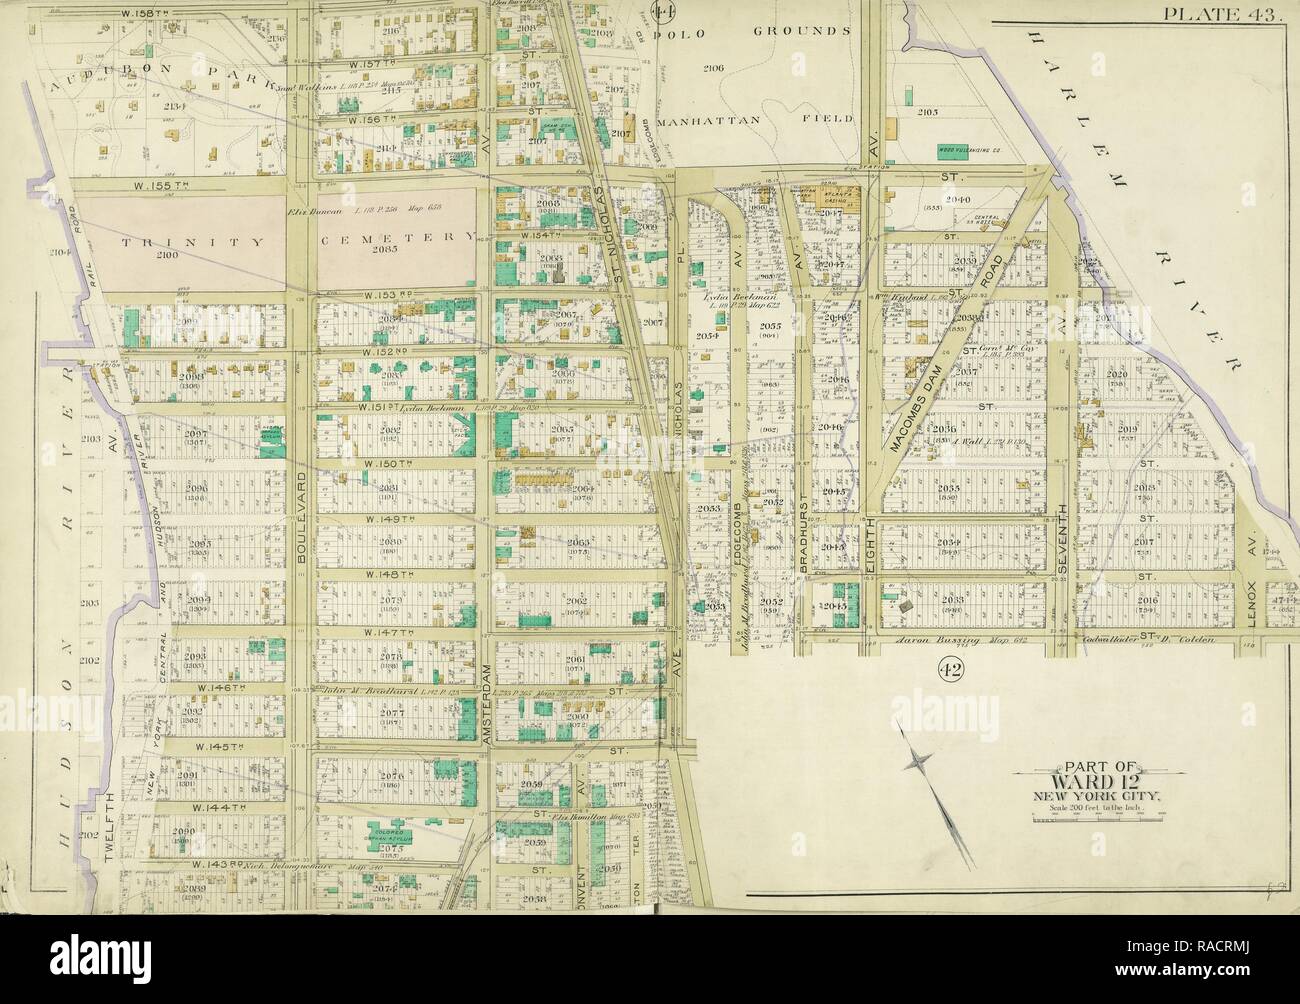 Manhattan, Double Page Plate No. 43 [Map bounded by W. 158thSt., Harlem River, W. 143rd St., Hudson River. Reimagined Stock Photo